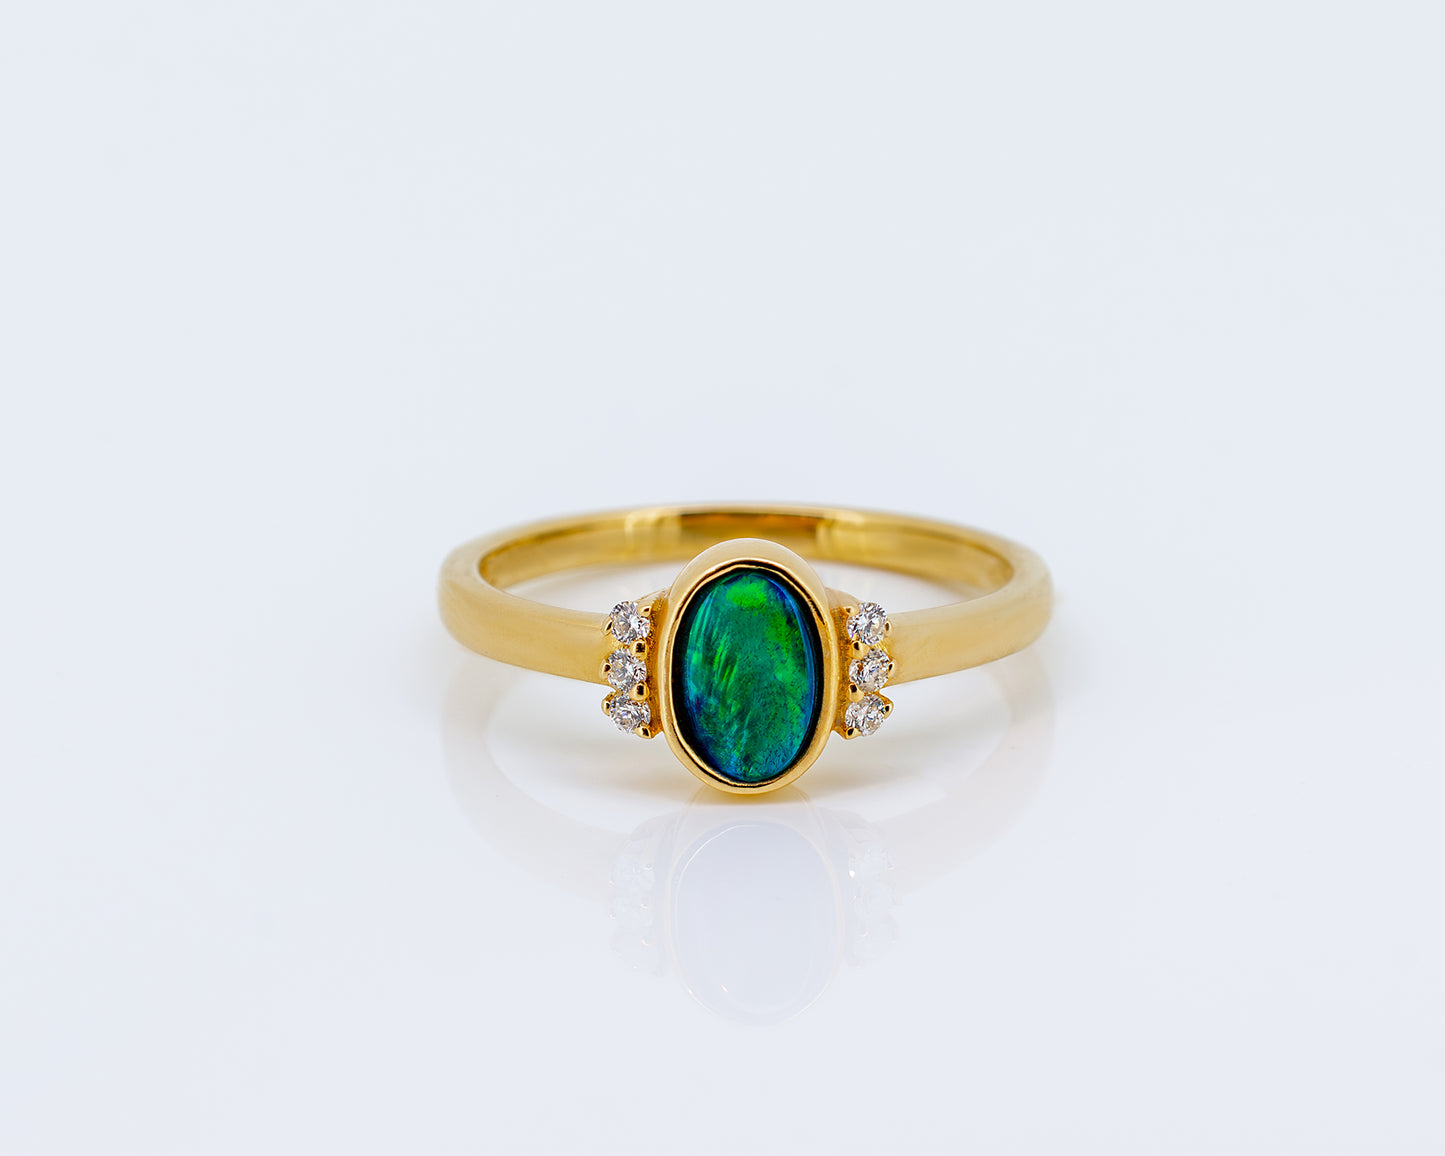 Colourful Boulder Opal Ring in 14ct Gold - Dress Ring